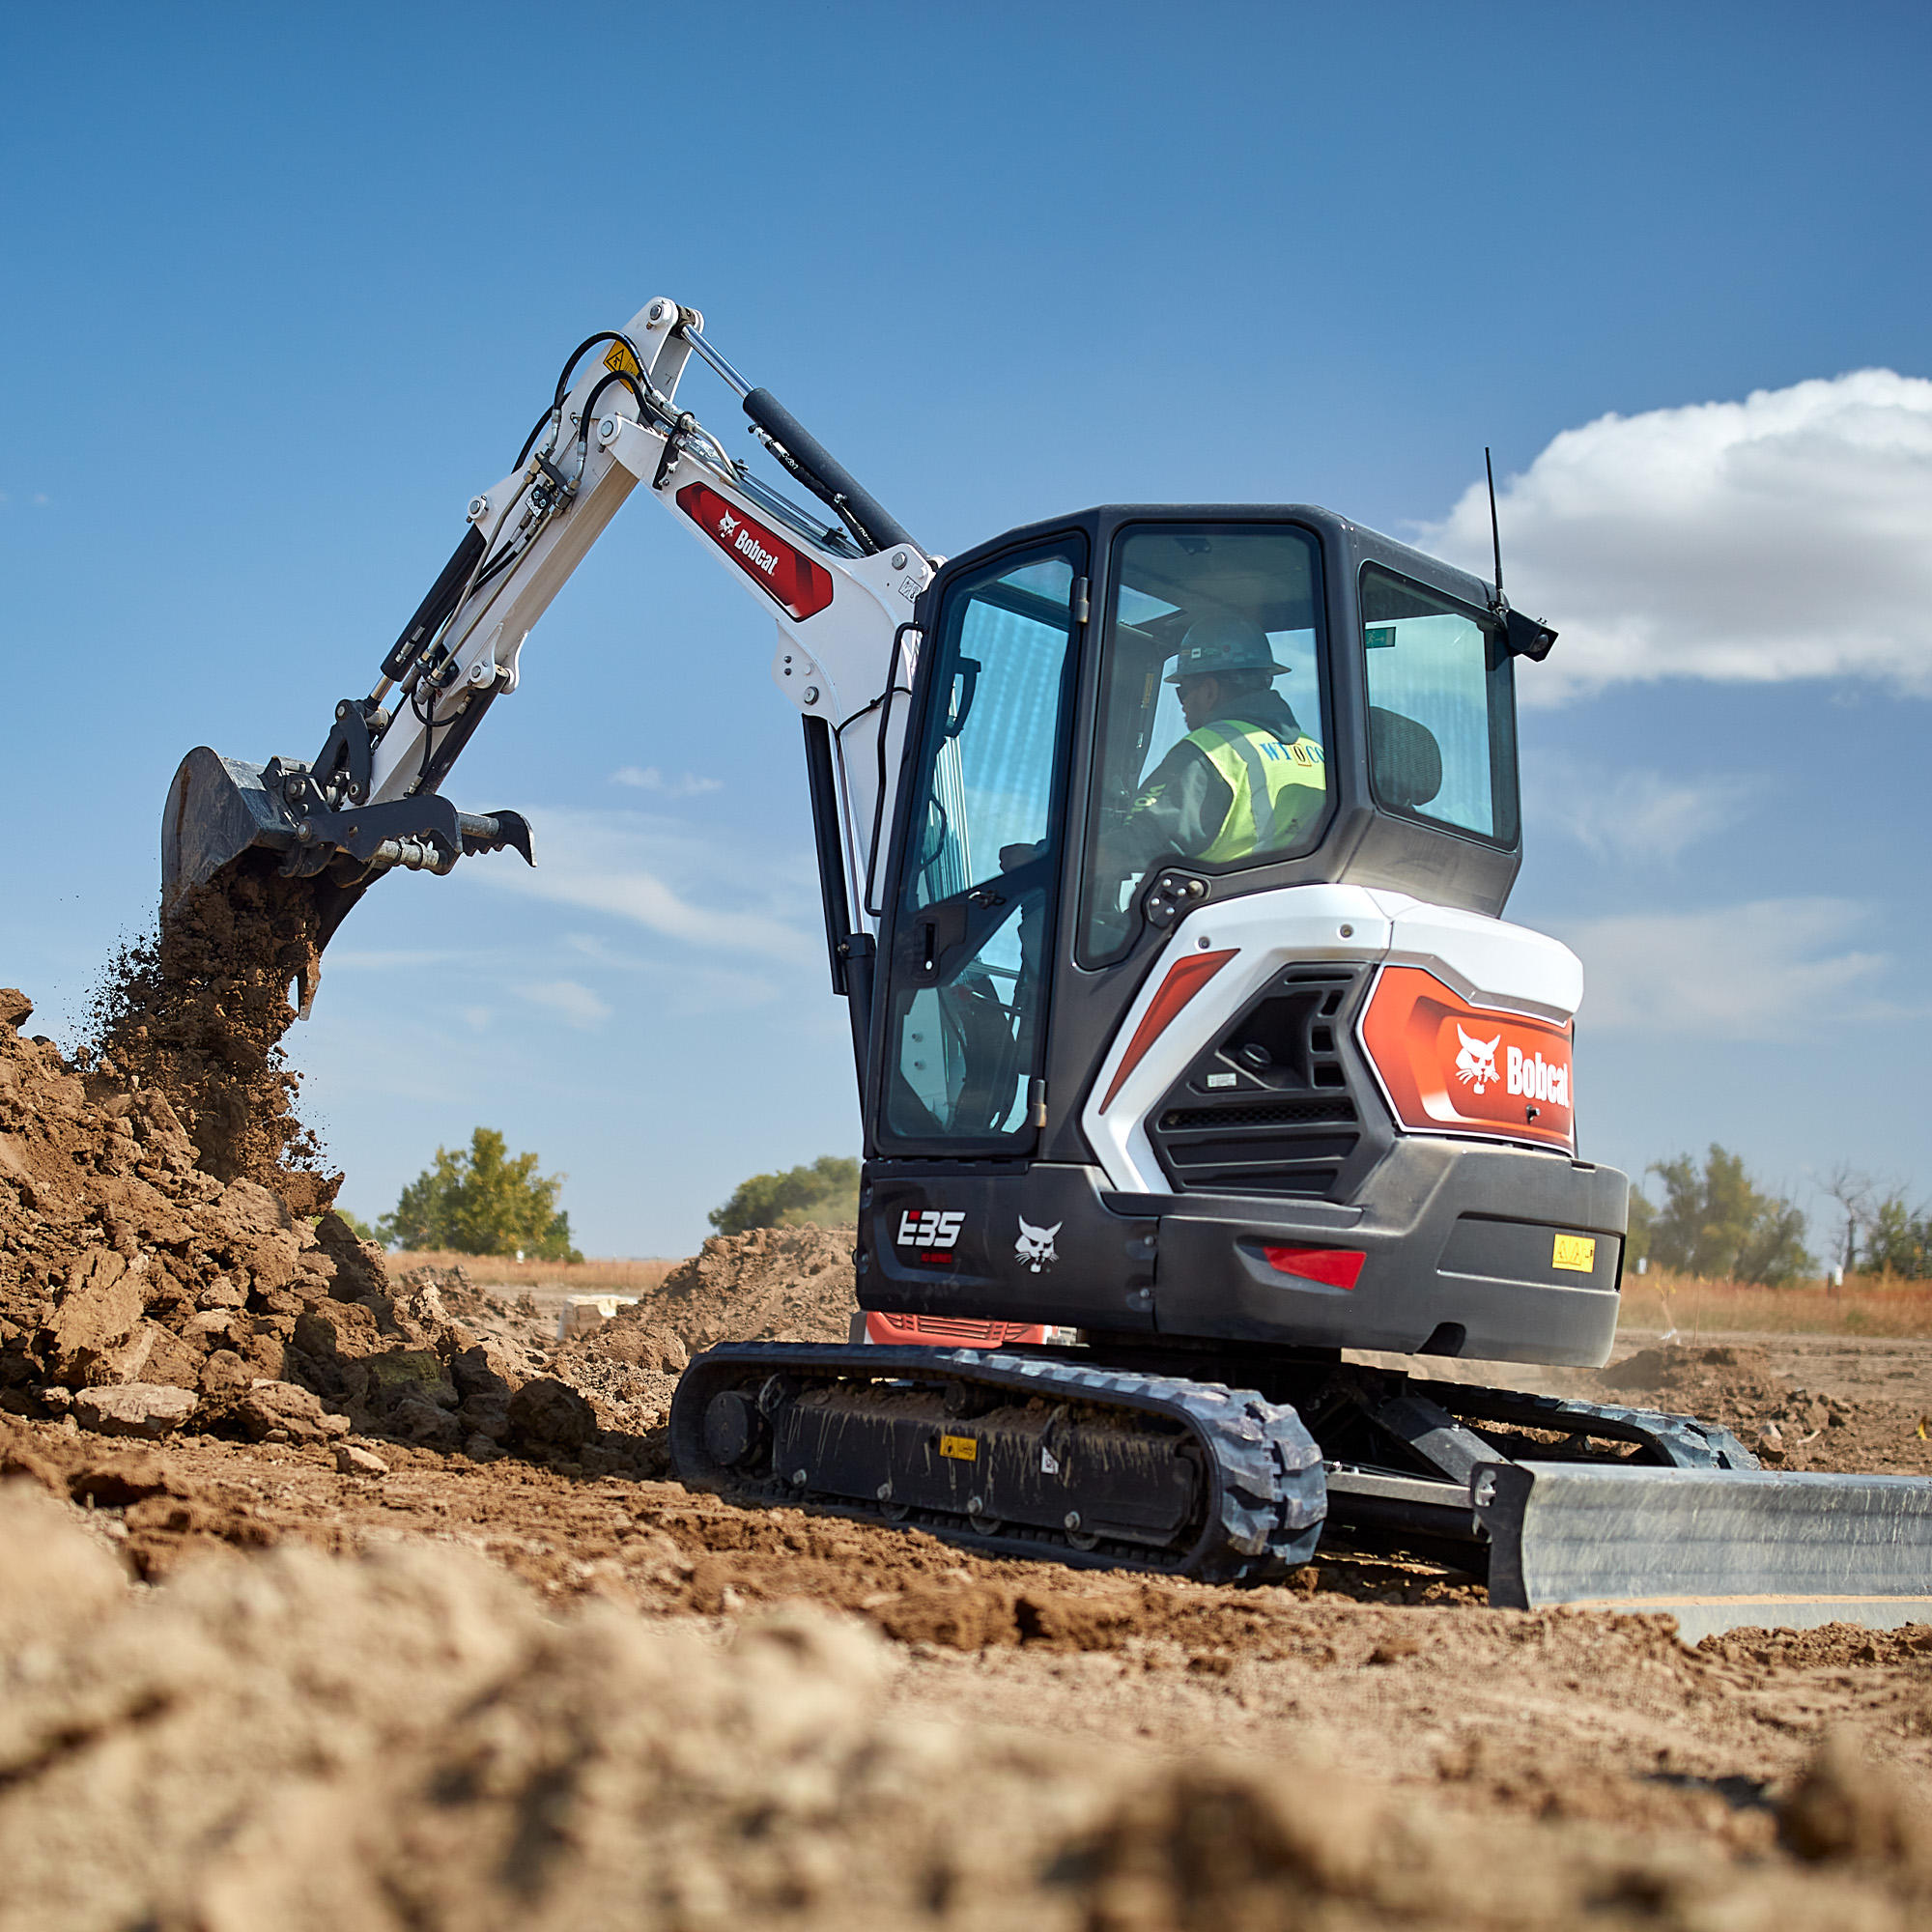 Bobcat E35 compact excavator with clamp and bucket Bobcat of Fort McMurray Fort Mcmurray (780)714-9200